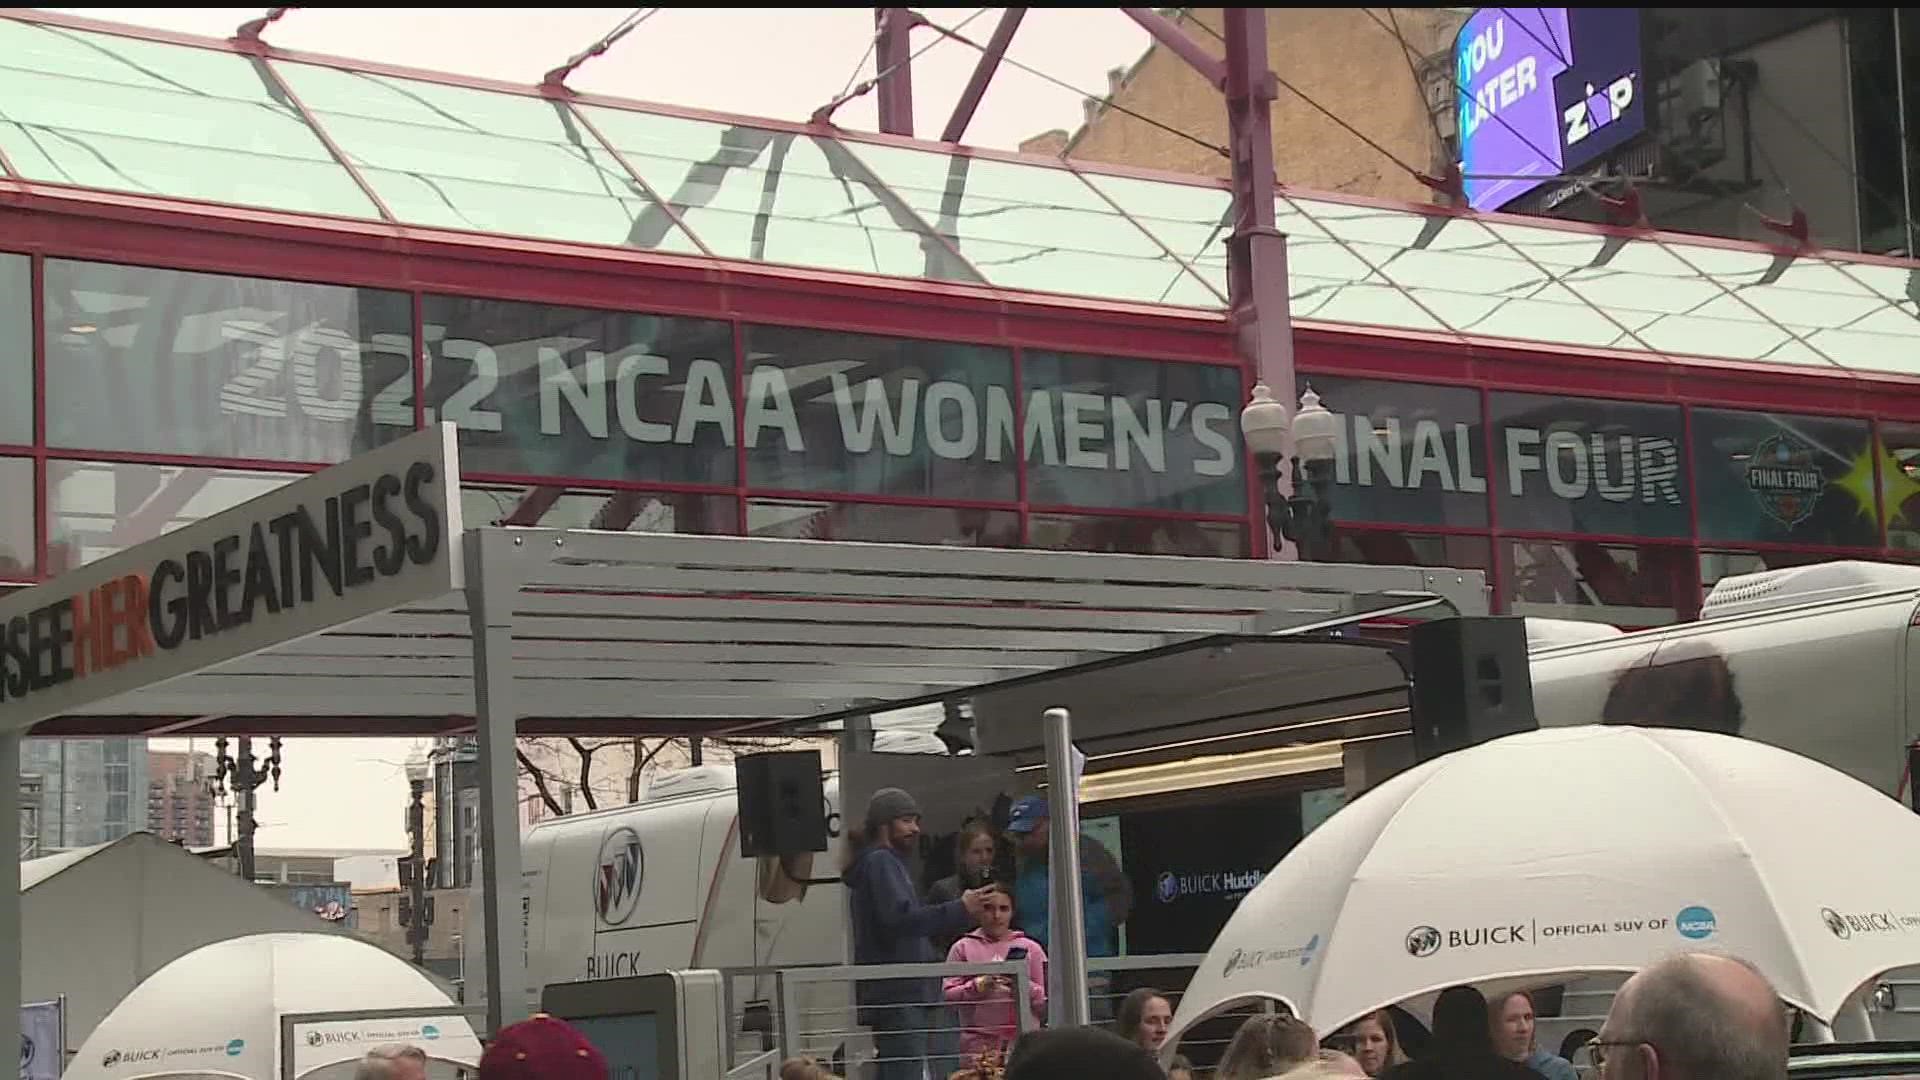 Fans of all ages congregated in downtown Minneapolis to take in some of the festivities tied to the NCAA Women's Final Four.